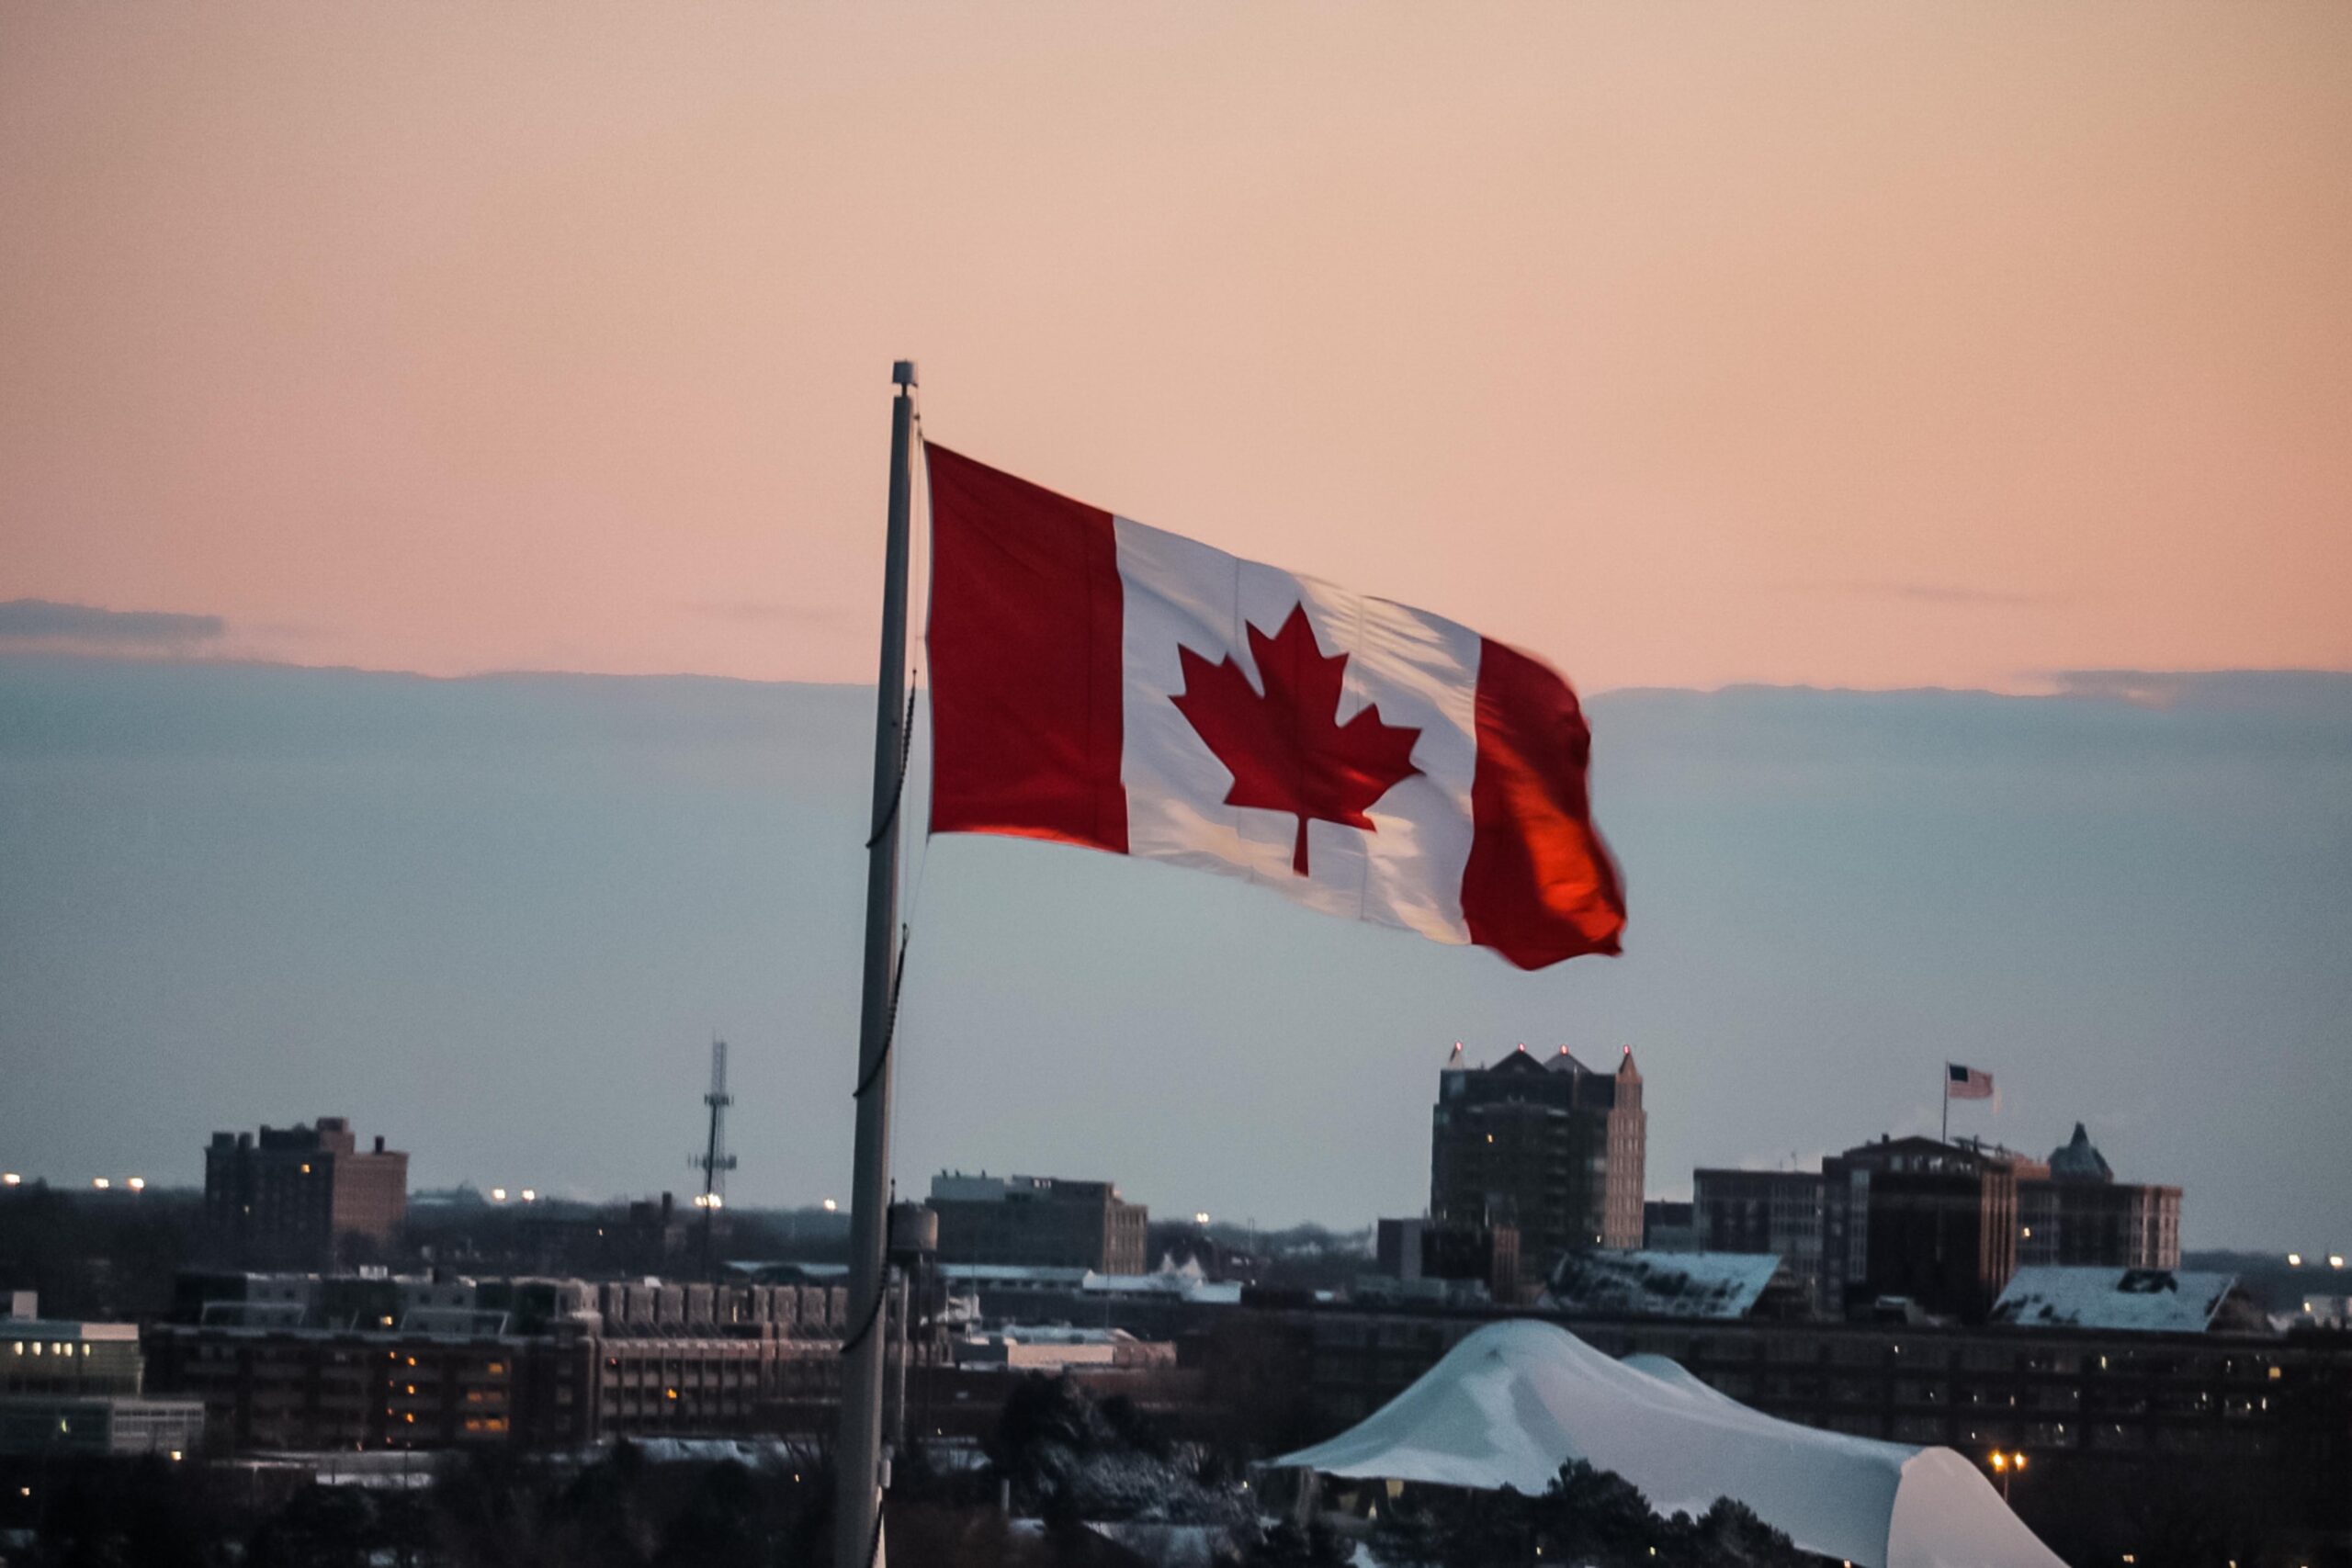 Canada flag on a pole in front of orange sky and city buildings